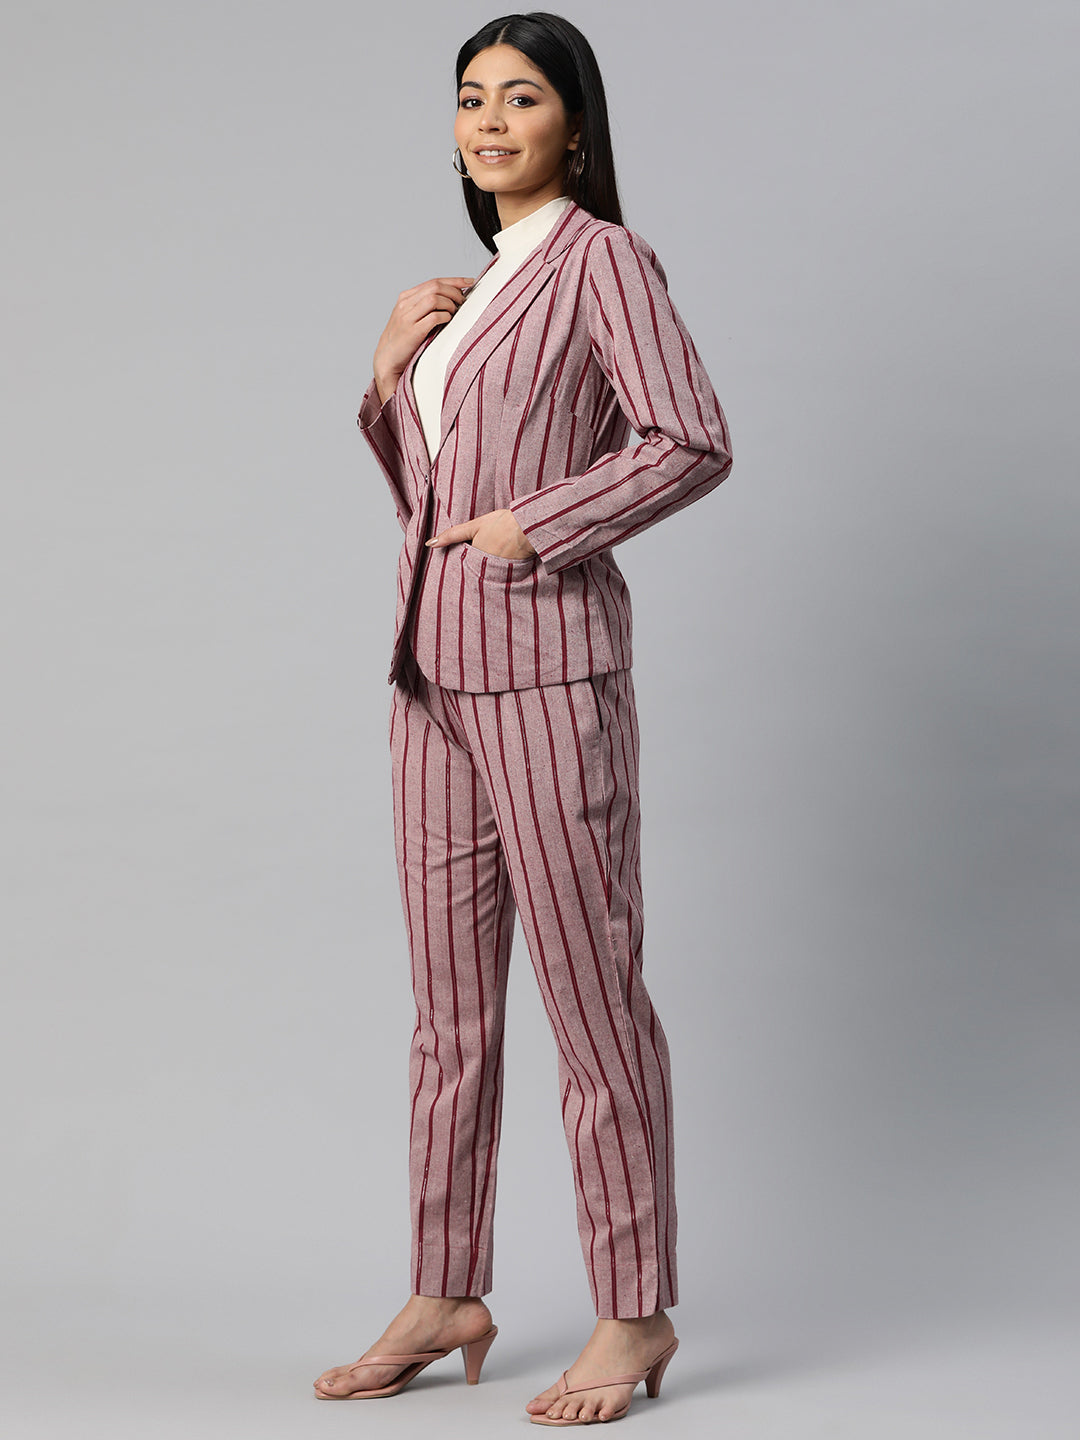 Cottinfab Women Striped Single-Breasted Two-Piece Formal Suit